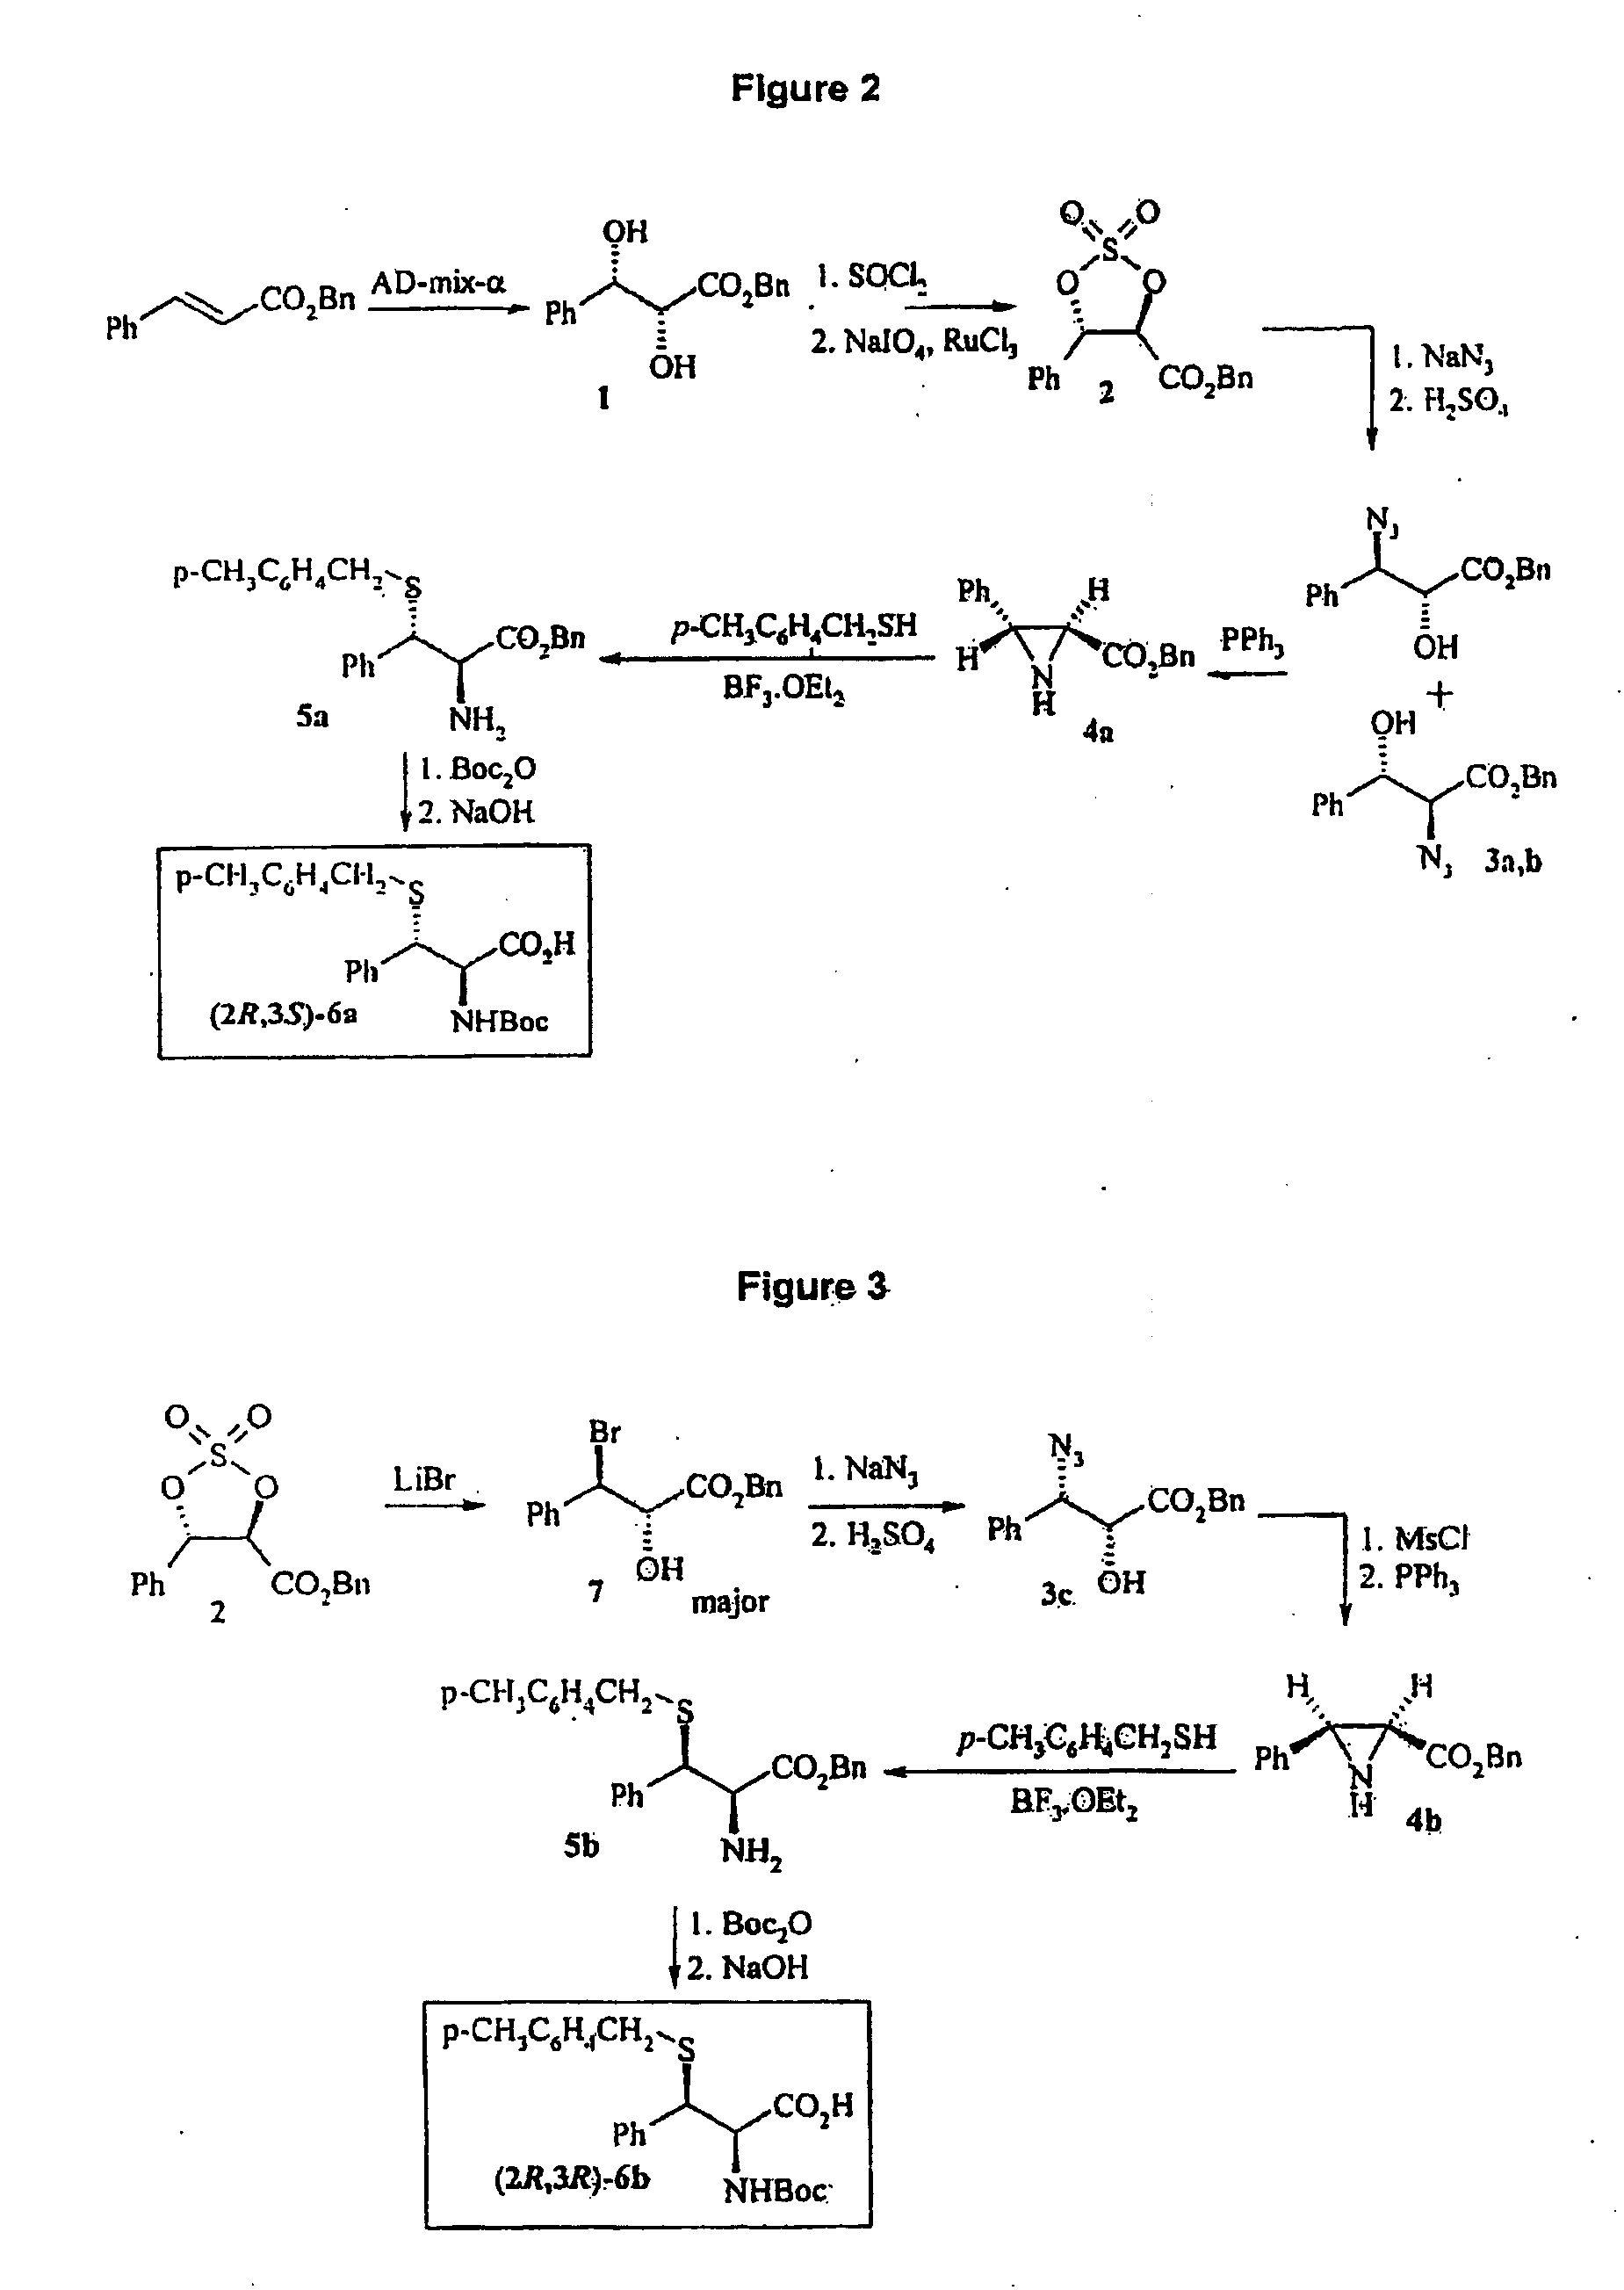 Side-Chain Extended Ligation